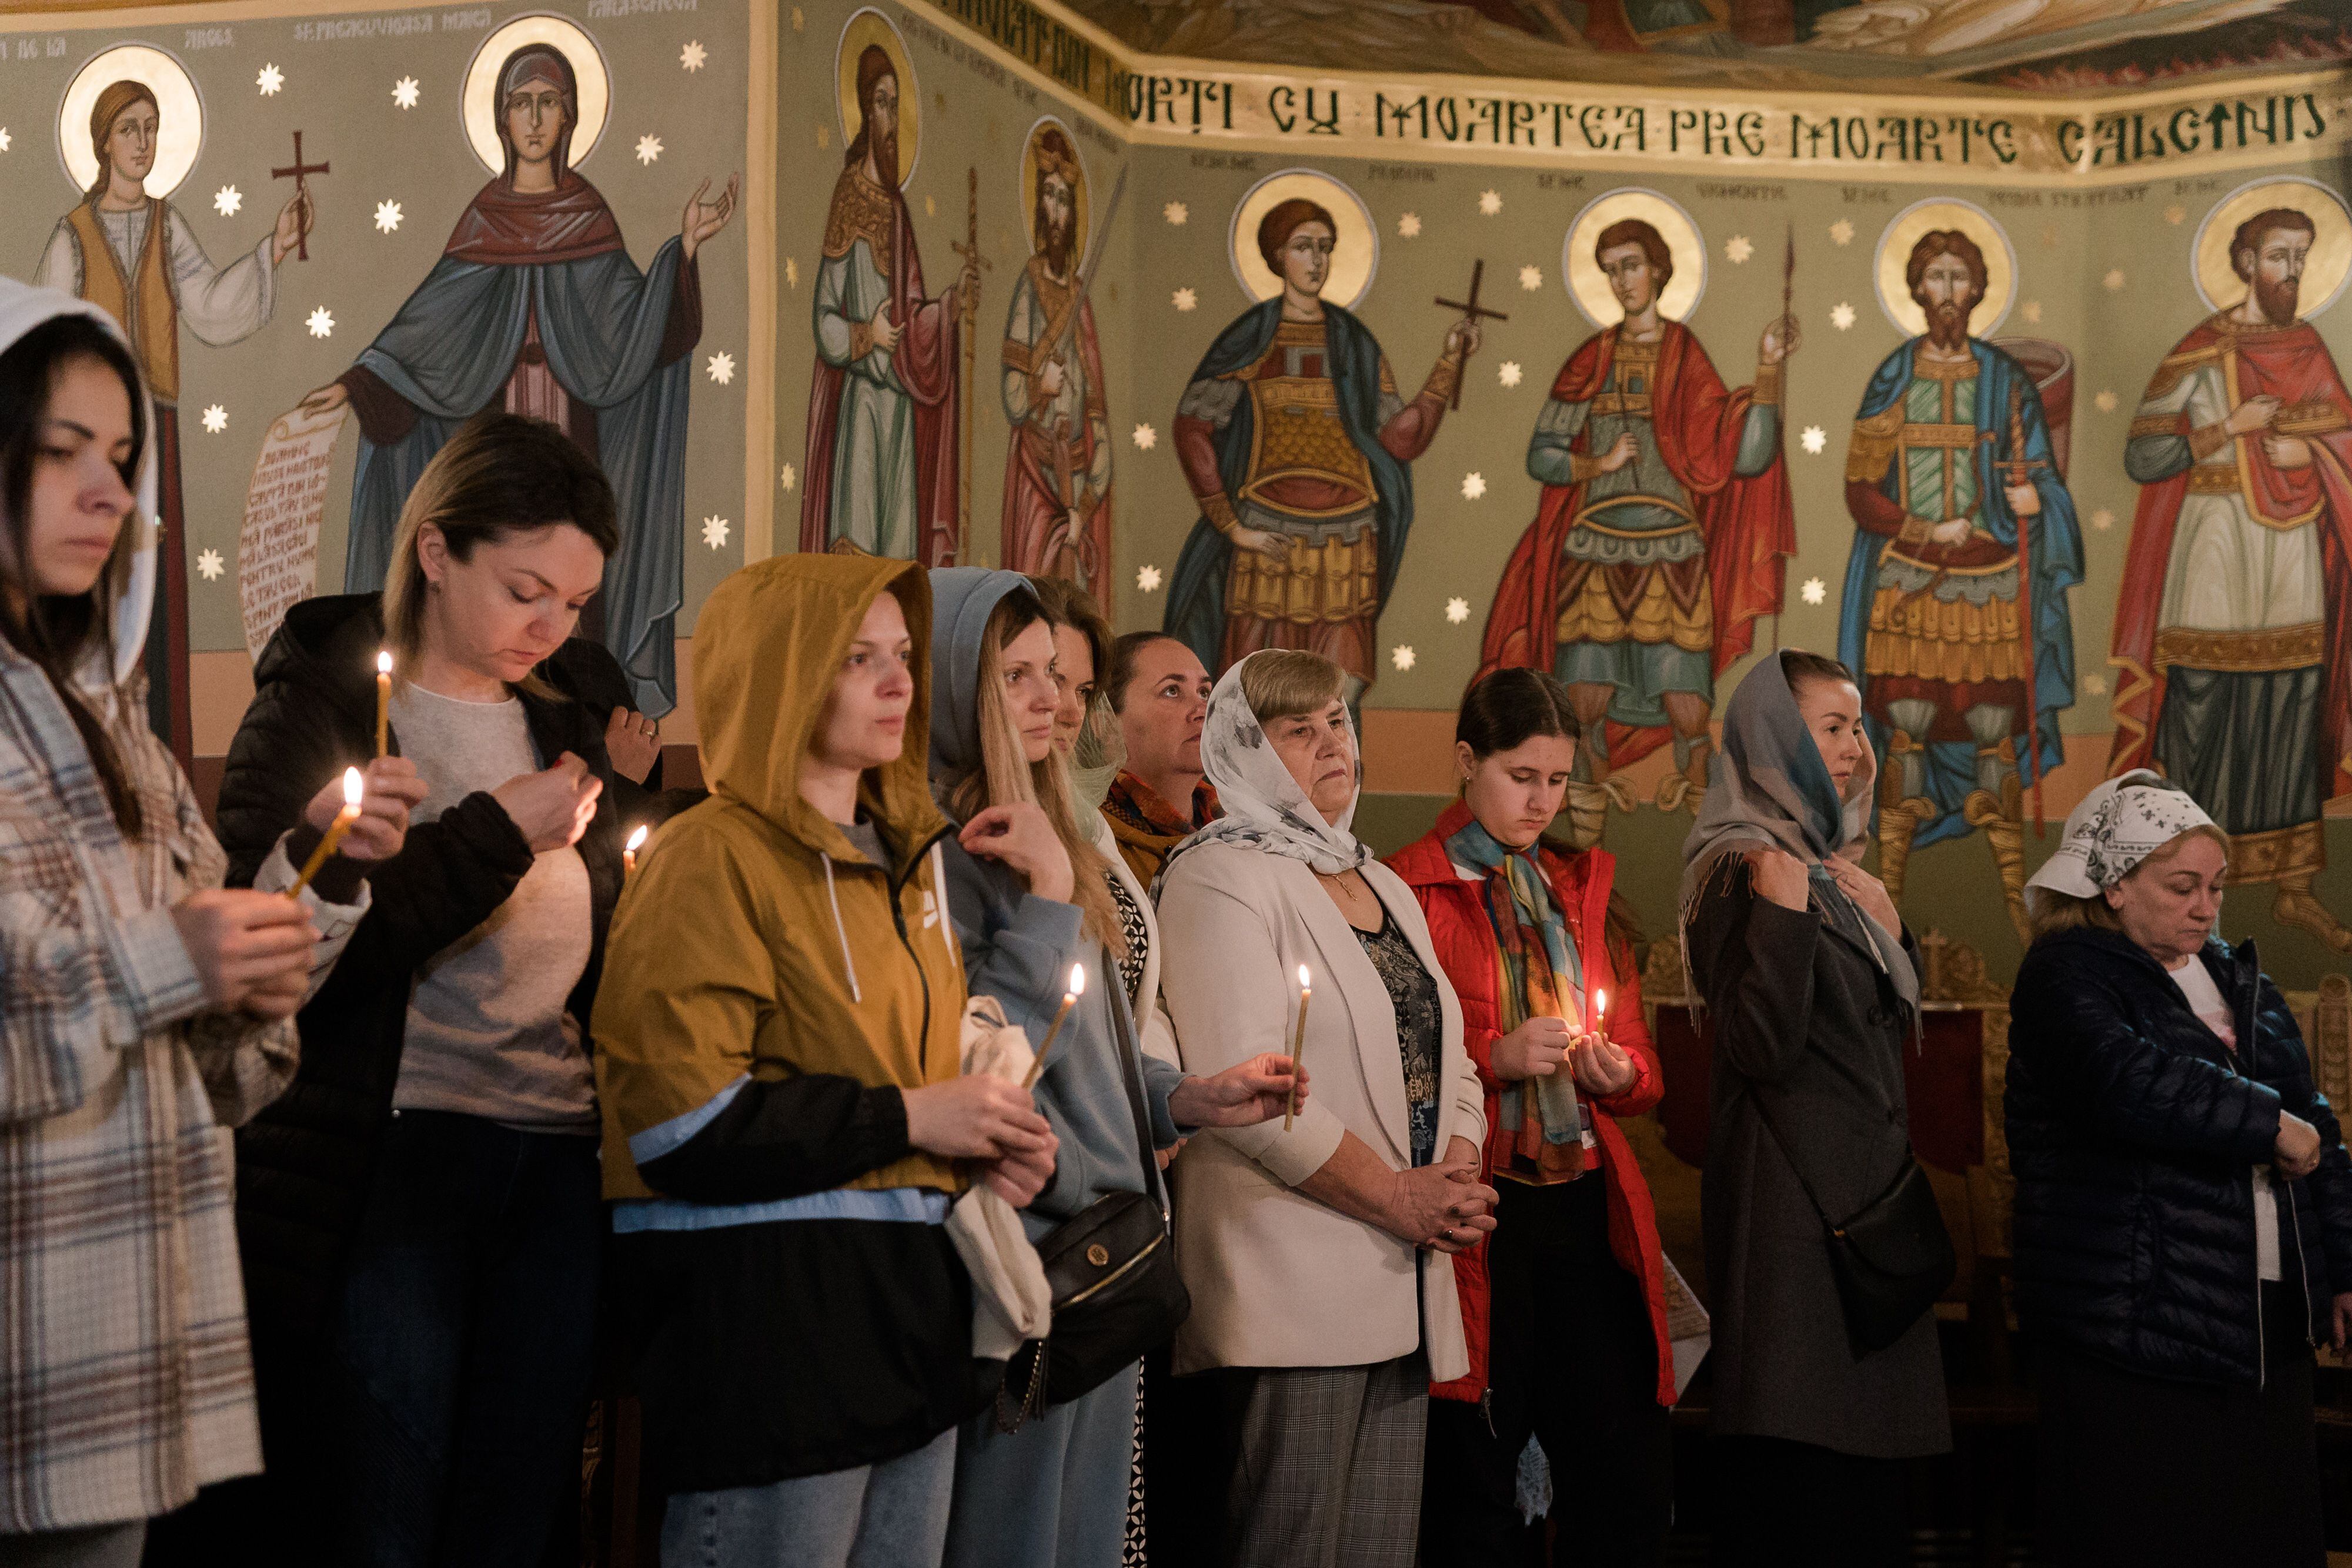 Ukrainian refugees attend a church service in Bucharest, Romania, to celebrate Orthodox Easter.  PHOTO: Andrei Pungovschi/Bloomberg